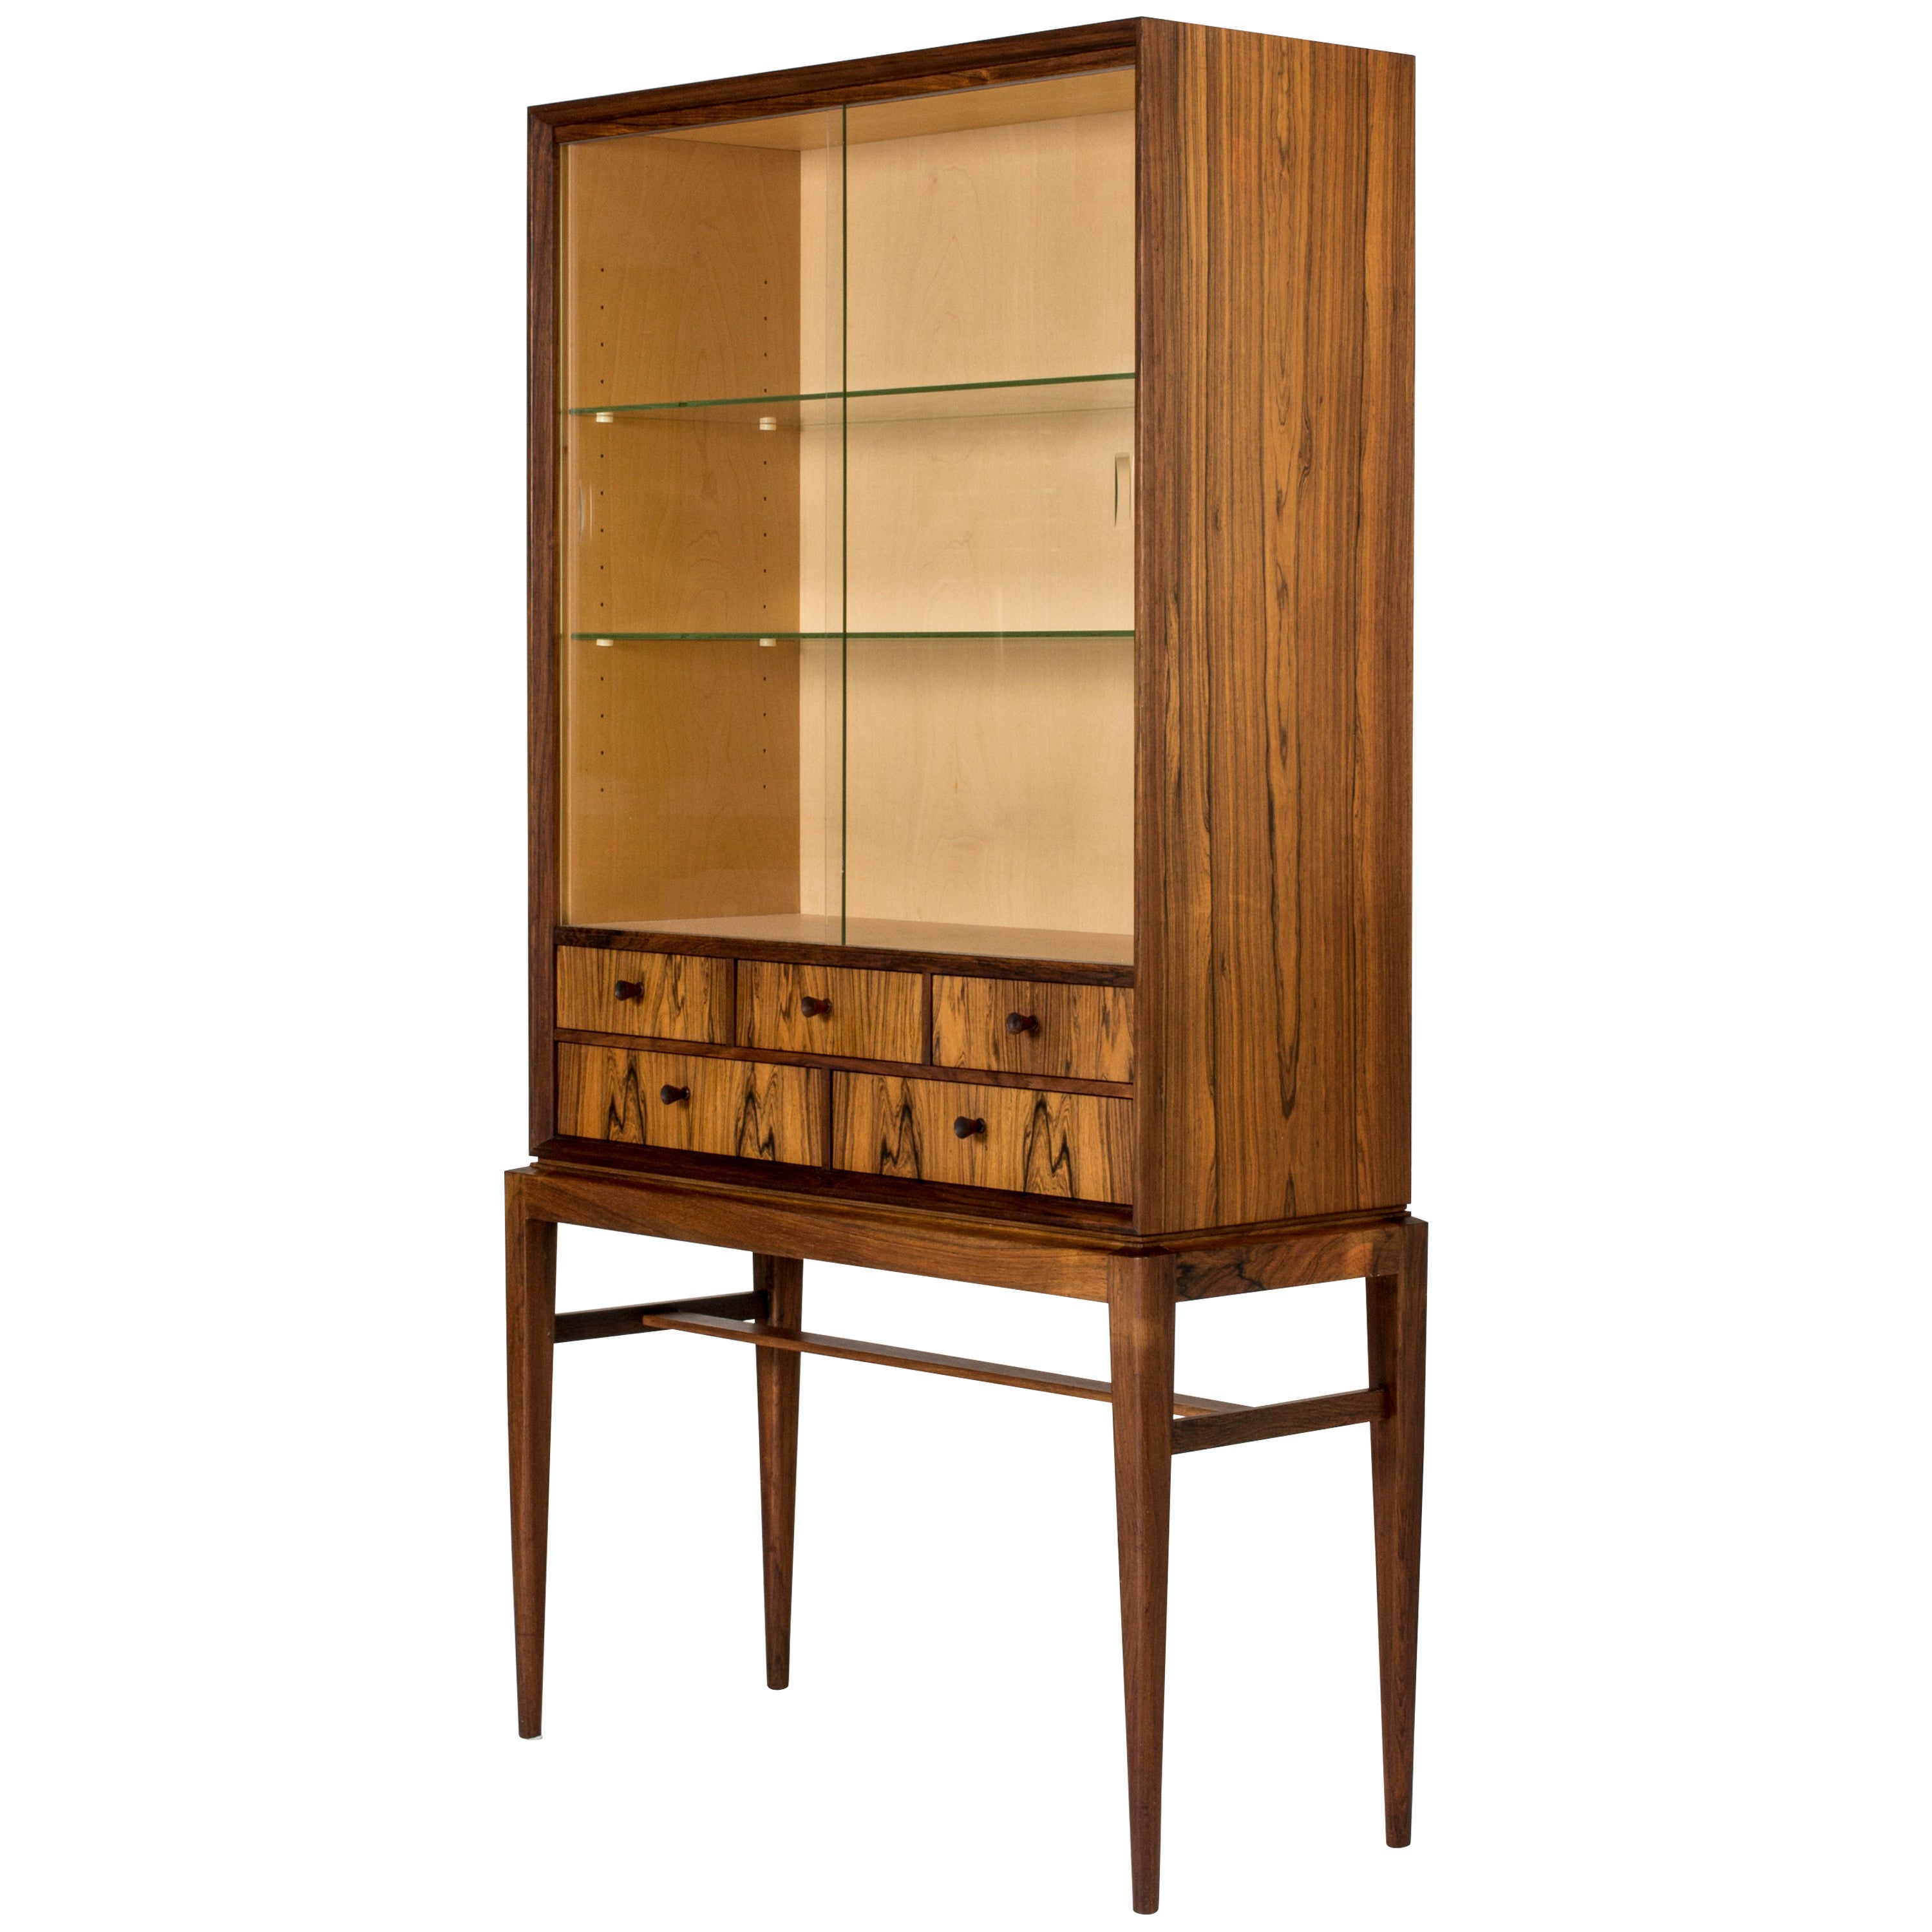 Midcentury Rosewood and Glass Vitrine Cabinet by Svante Skogh for Seffle